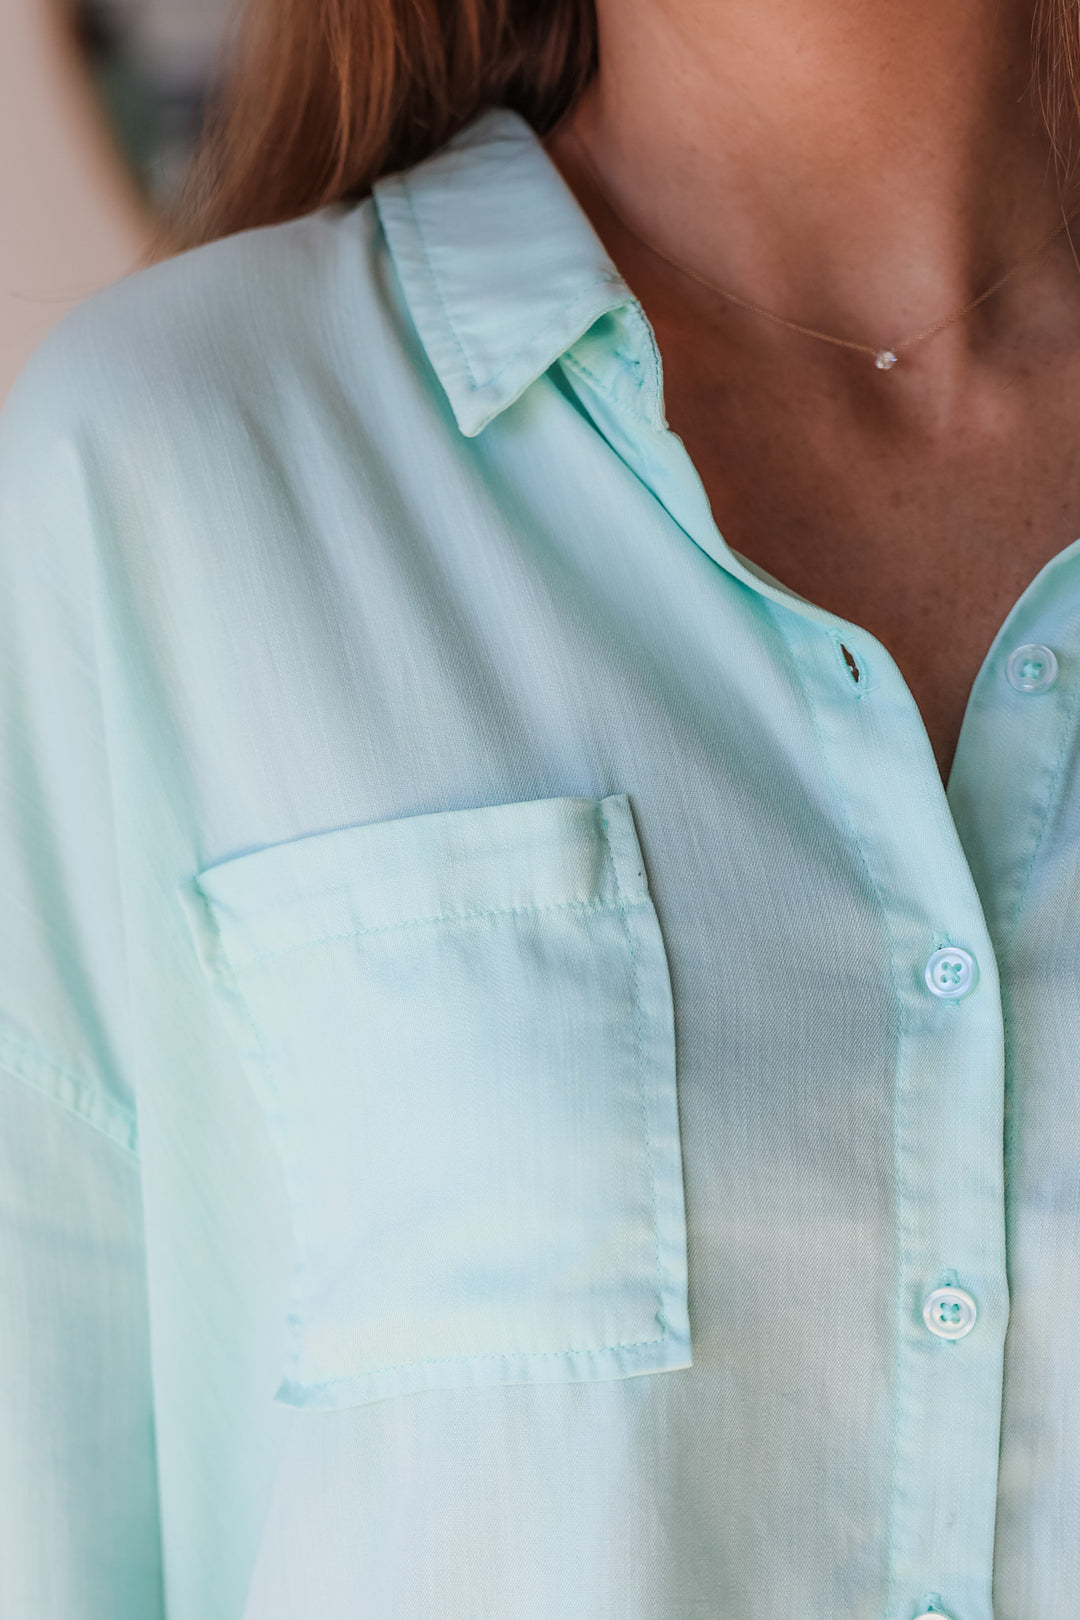 A closeup of the shoulder of a woman wearing a mint green button down with pockets.